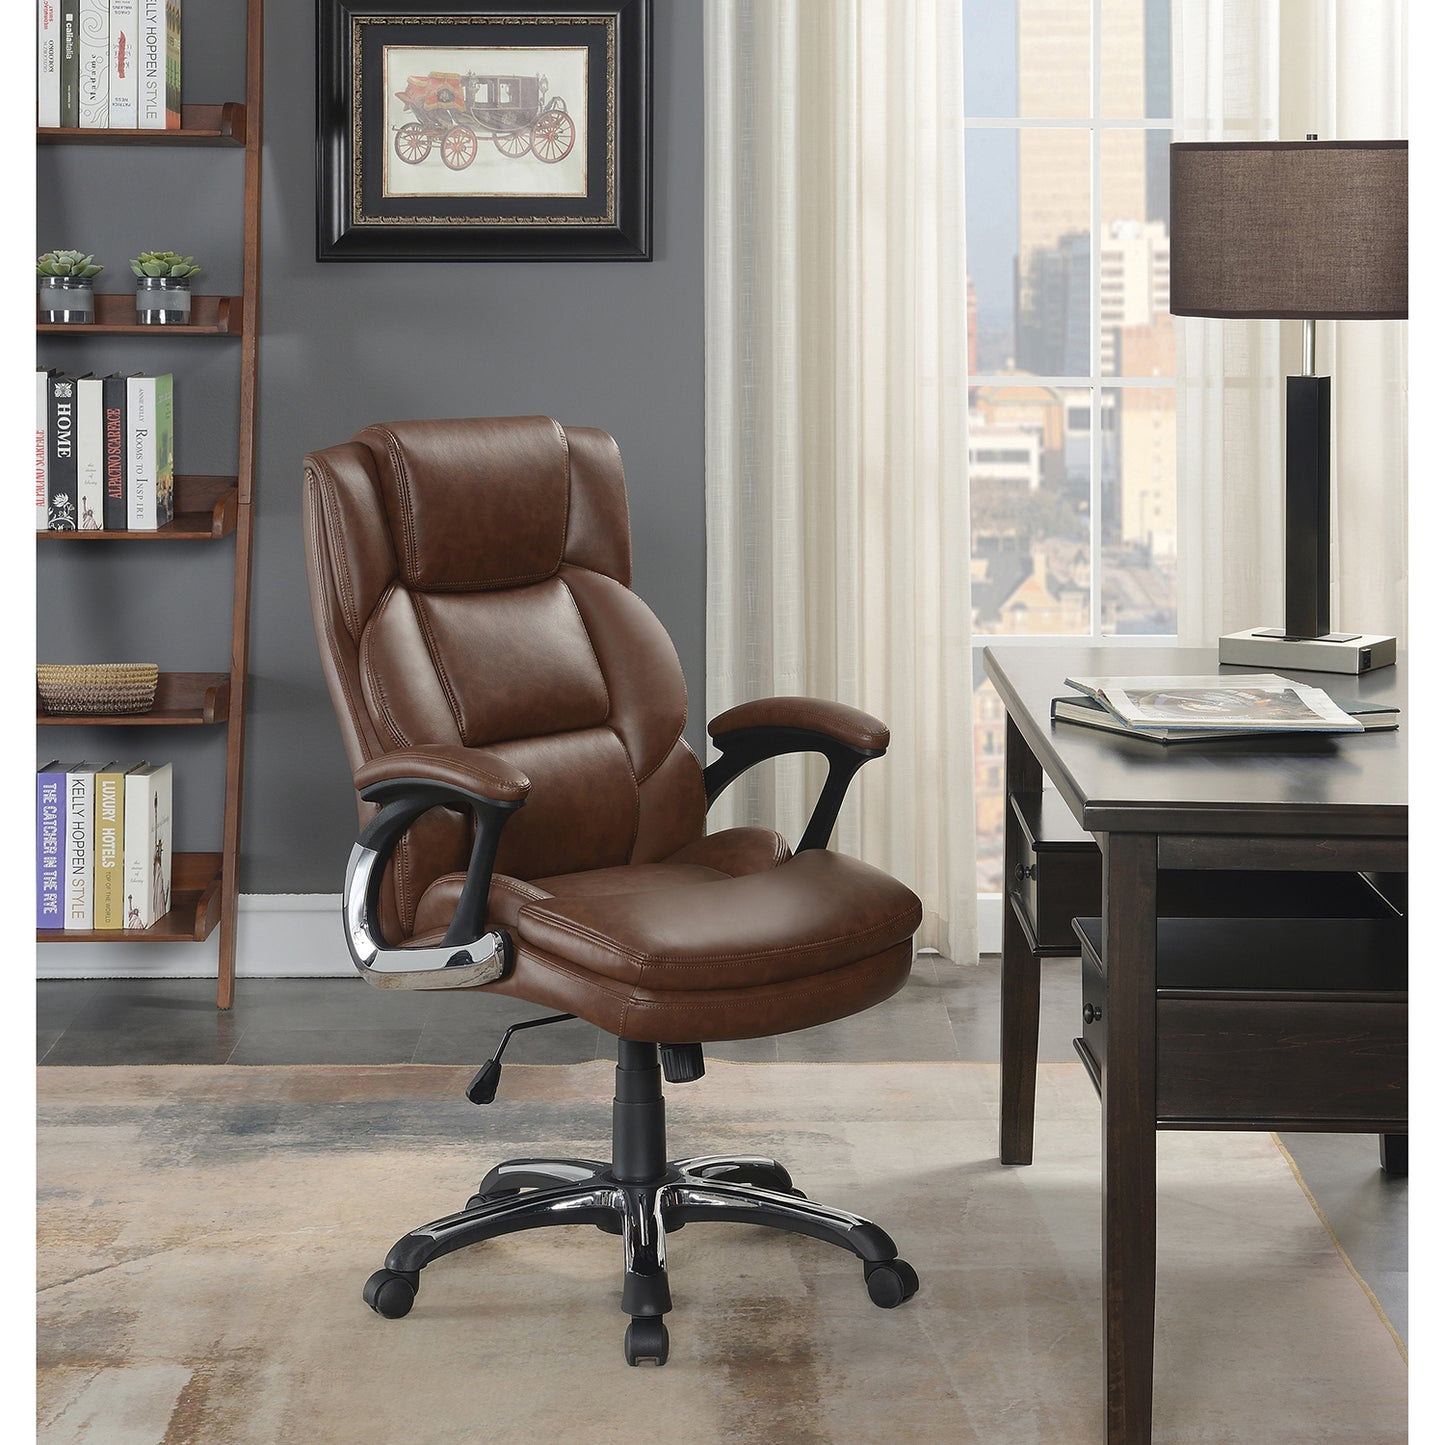 Adjustable Height Office Chair with Padded Arm Brown and Black